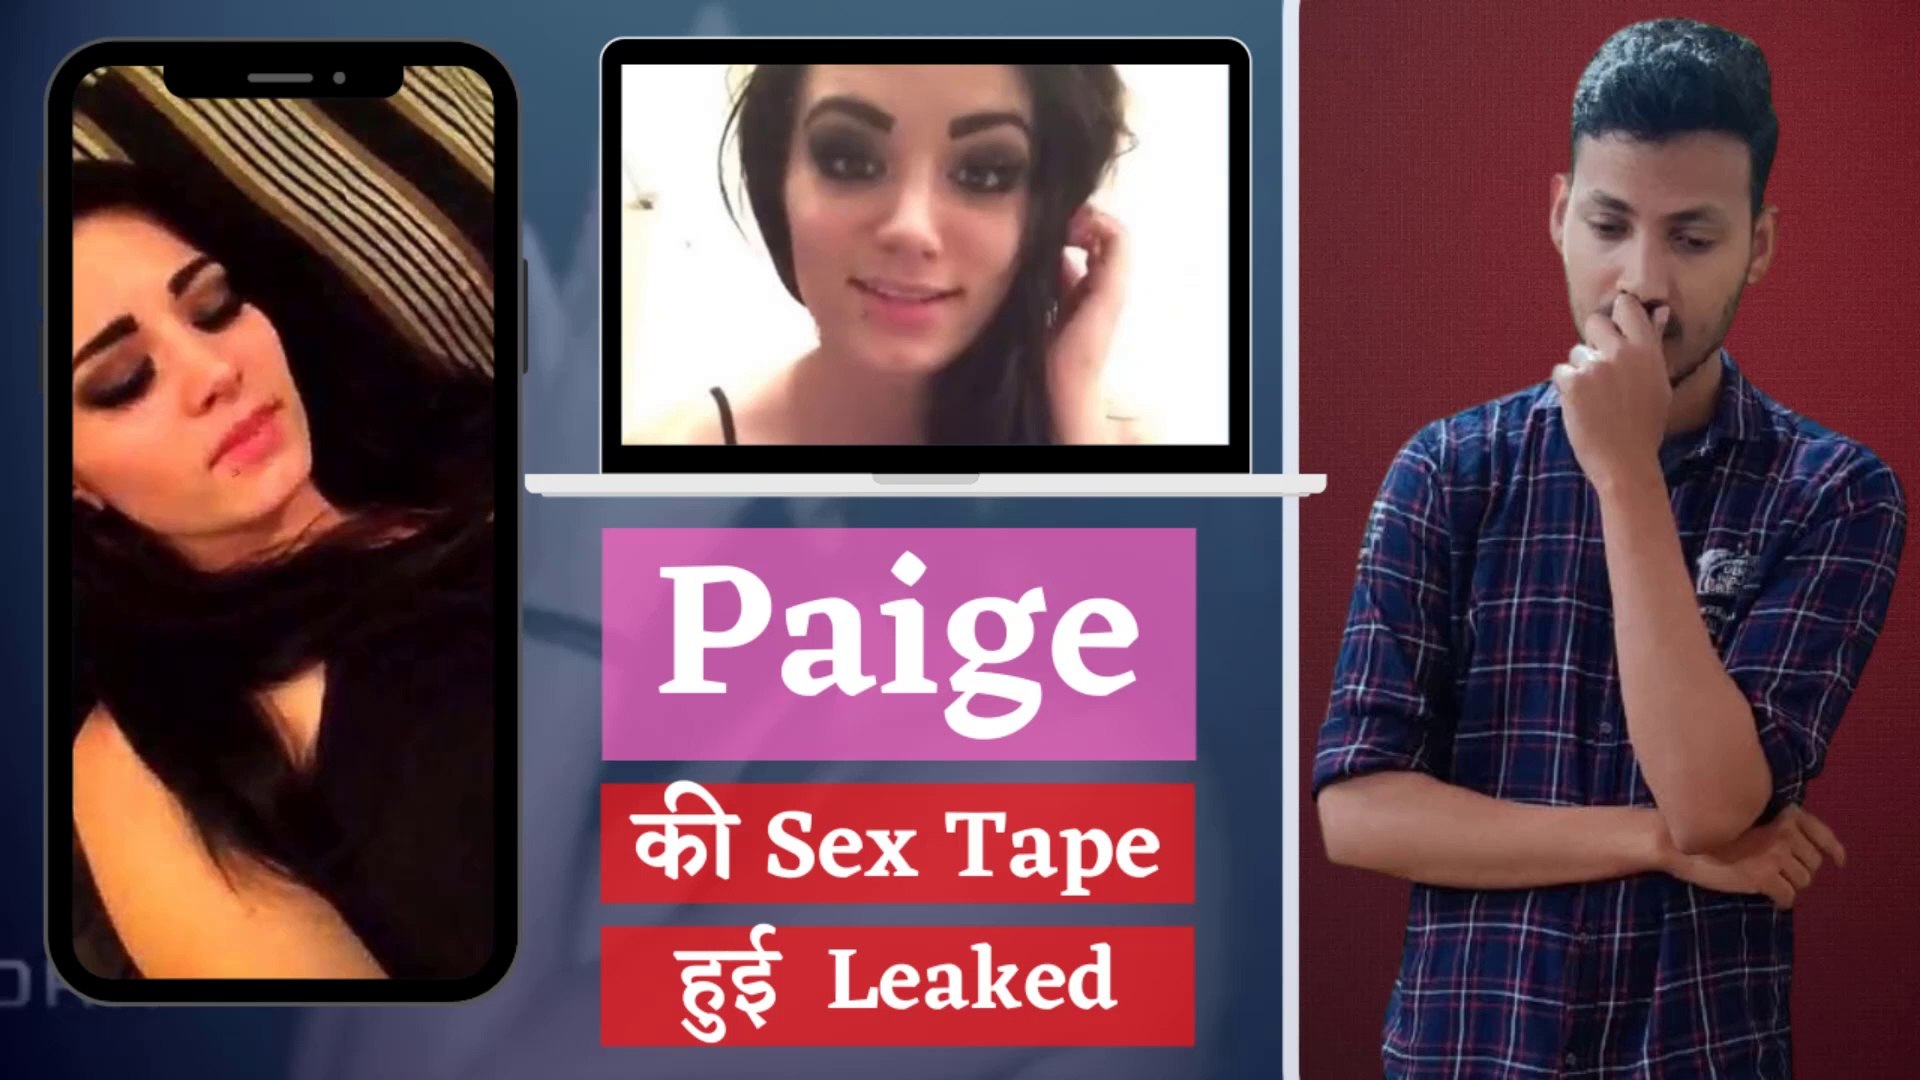 Wwe Divas Girl Paige Sex Video - WWE Diva Paige Sex Tape Controversy Explained In Hindi - video Dailymotion